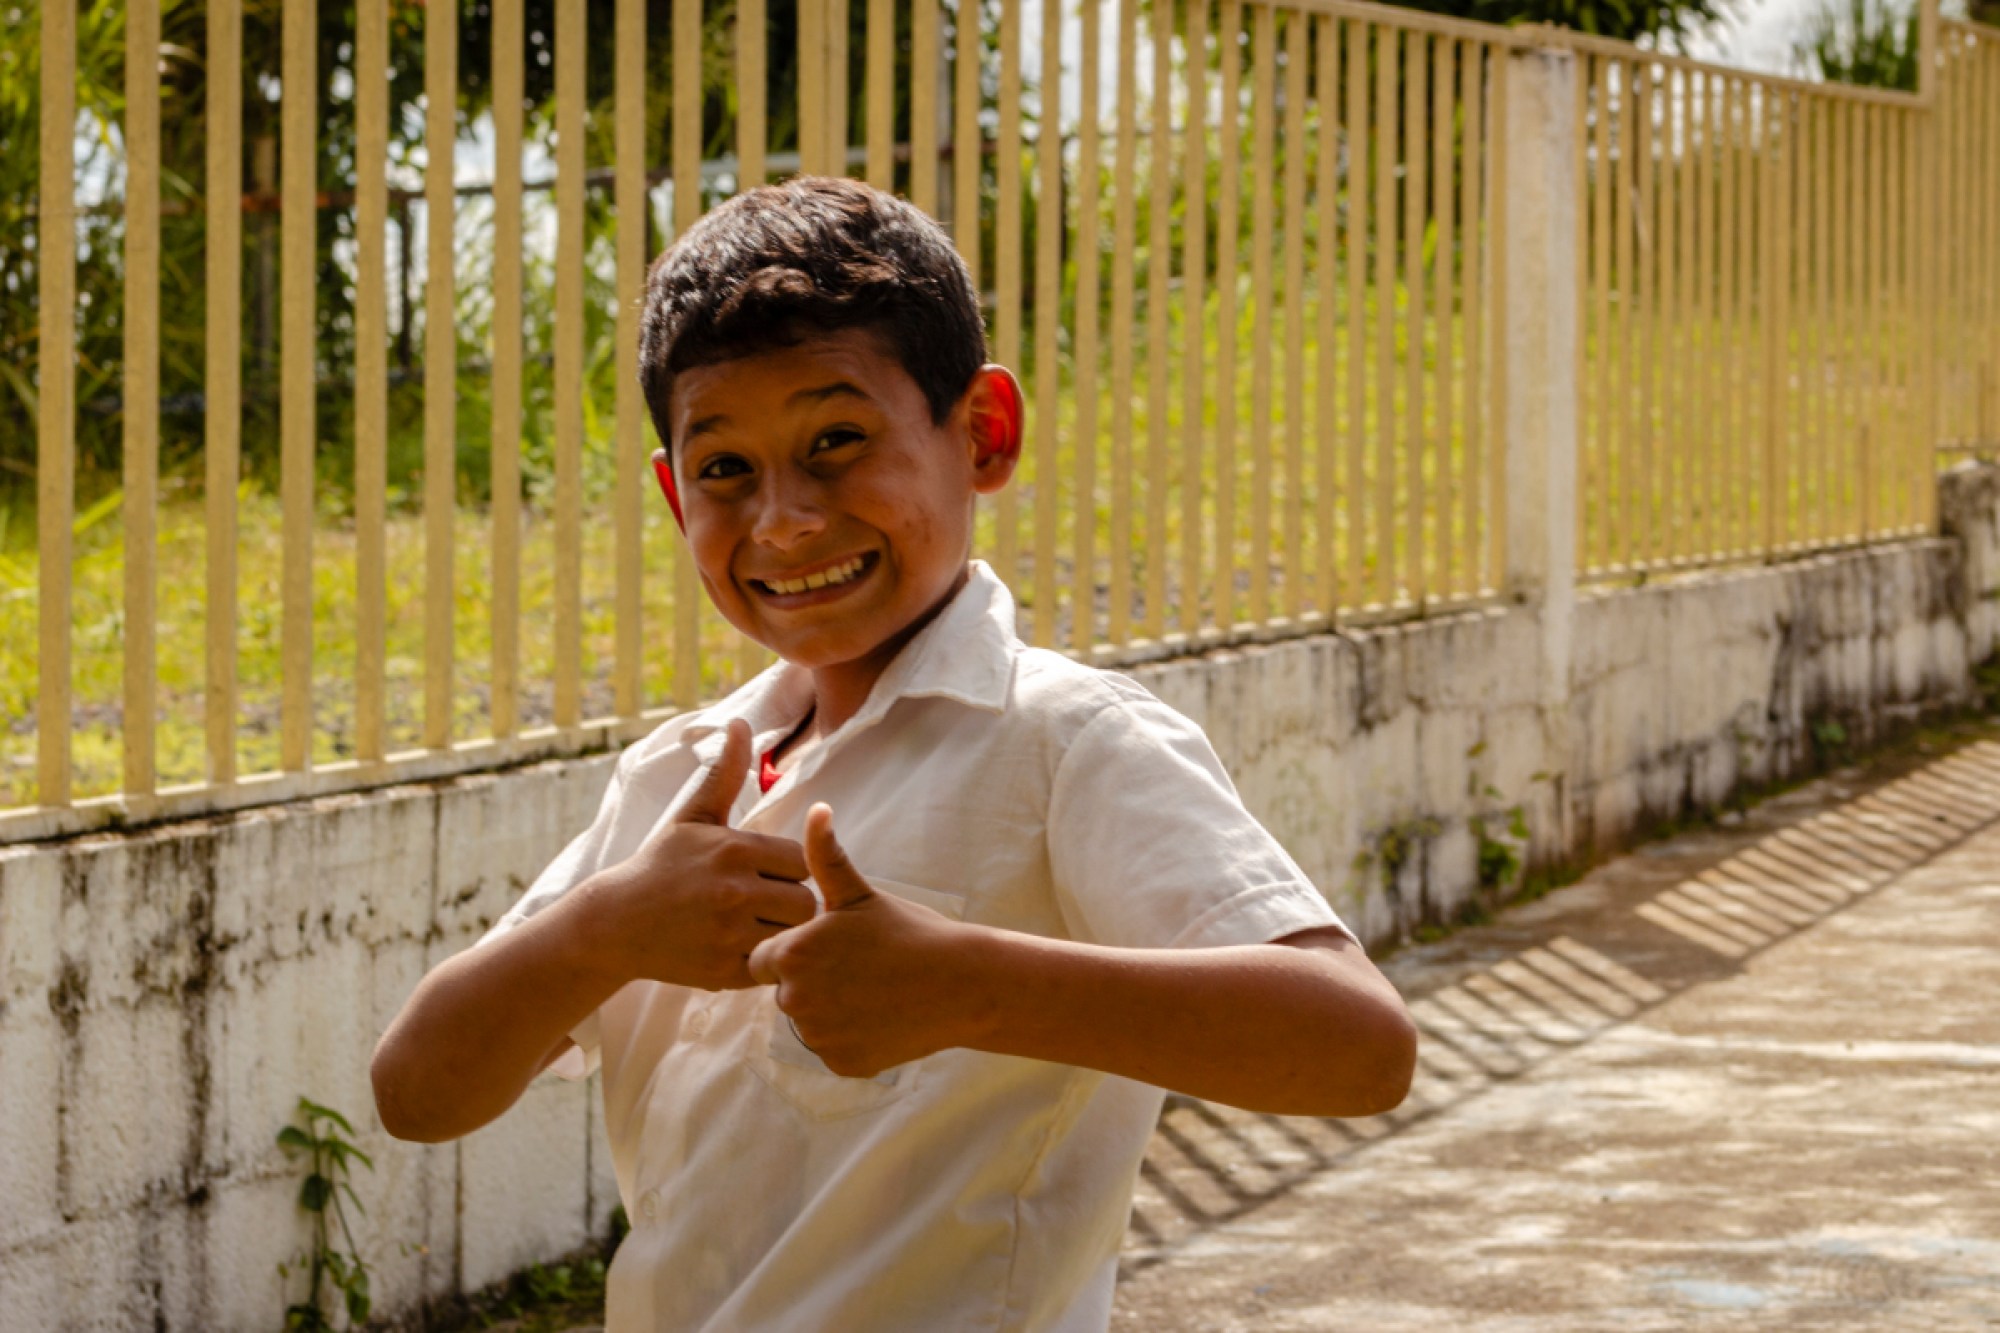 Andres flashes a double thumbs up at school. Photo by Angelika Ramirez